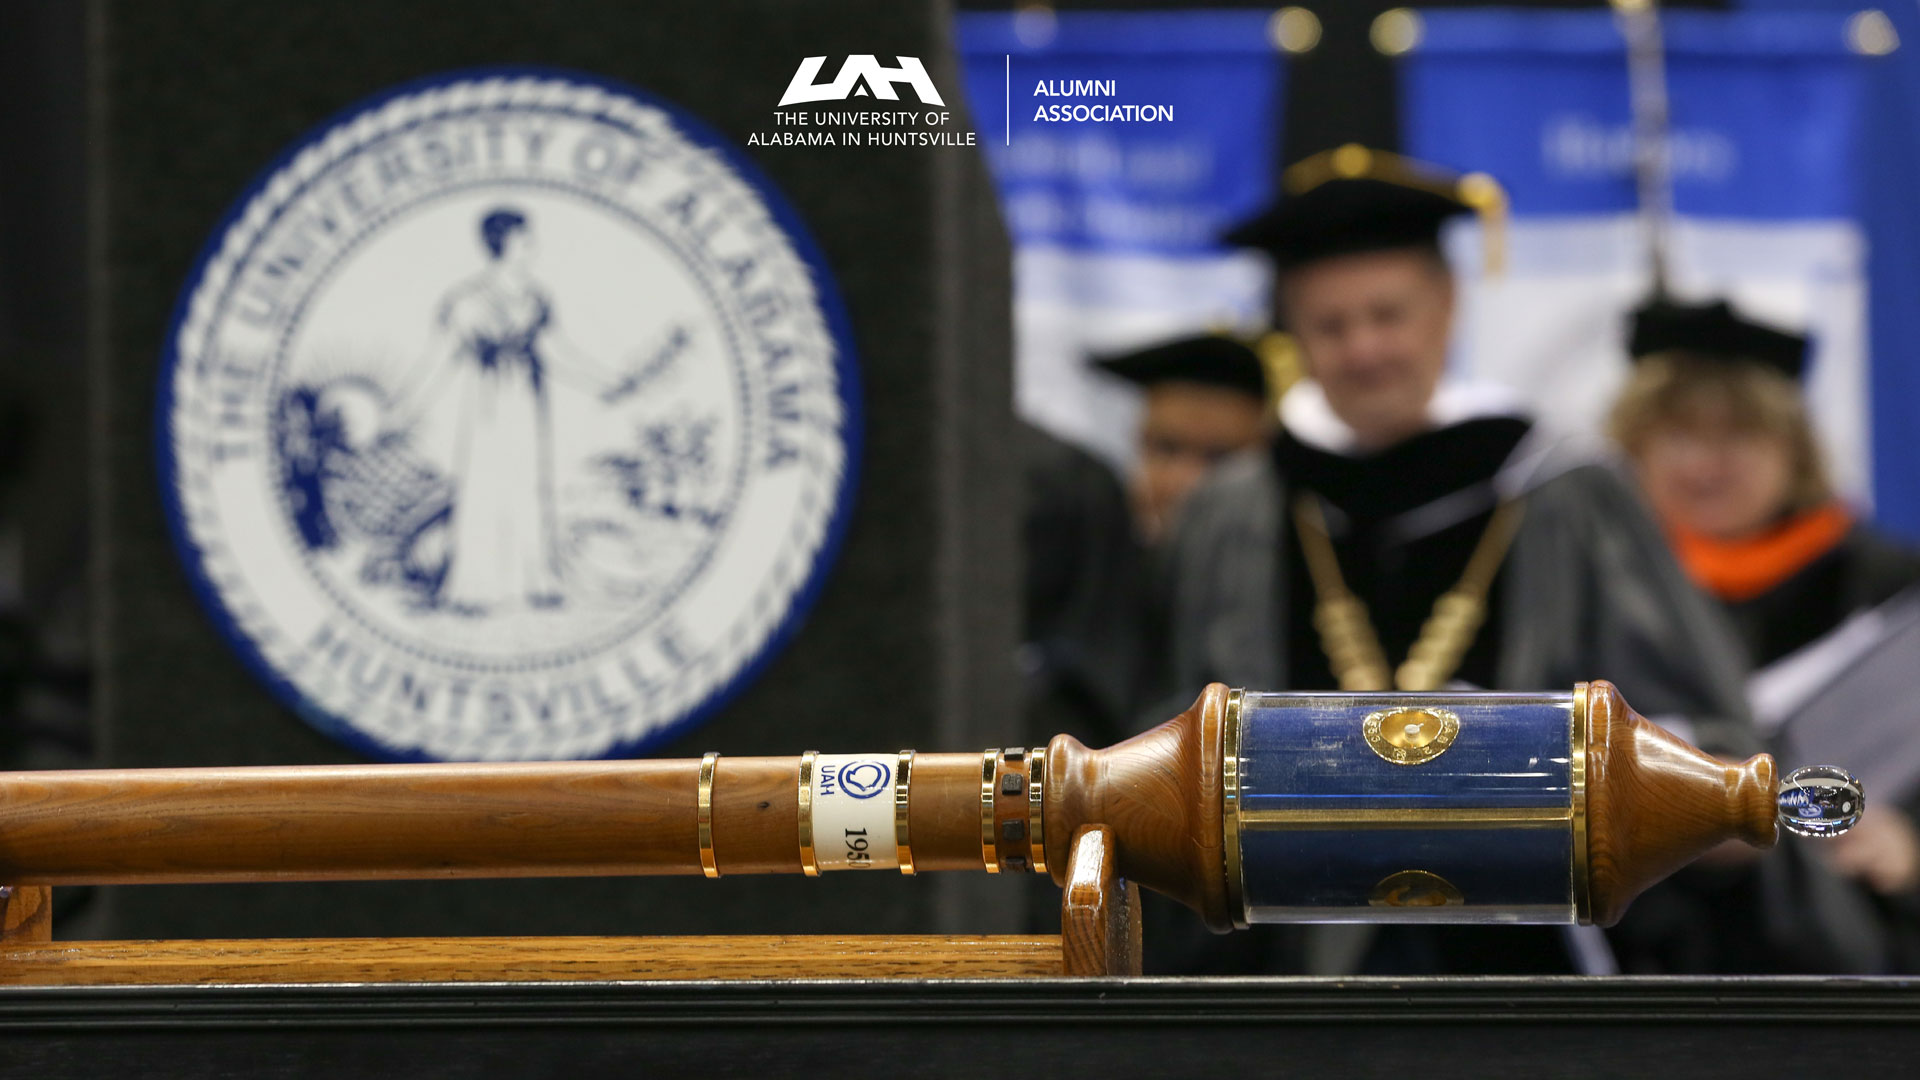 uah zoom background with university alumni logo and a photo of the university scepter